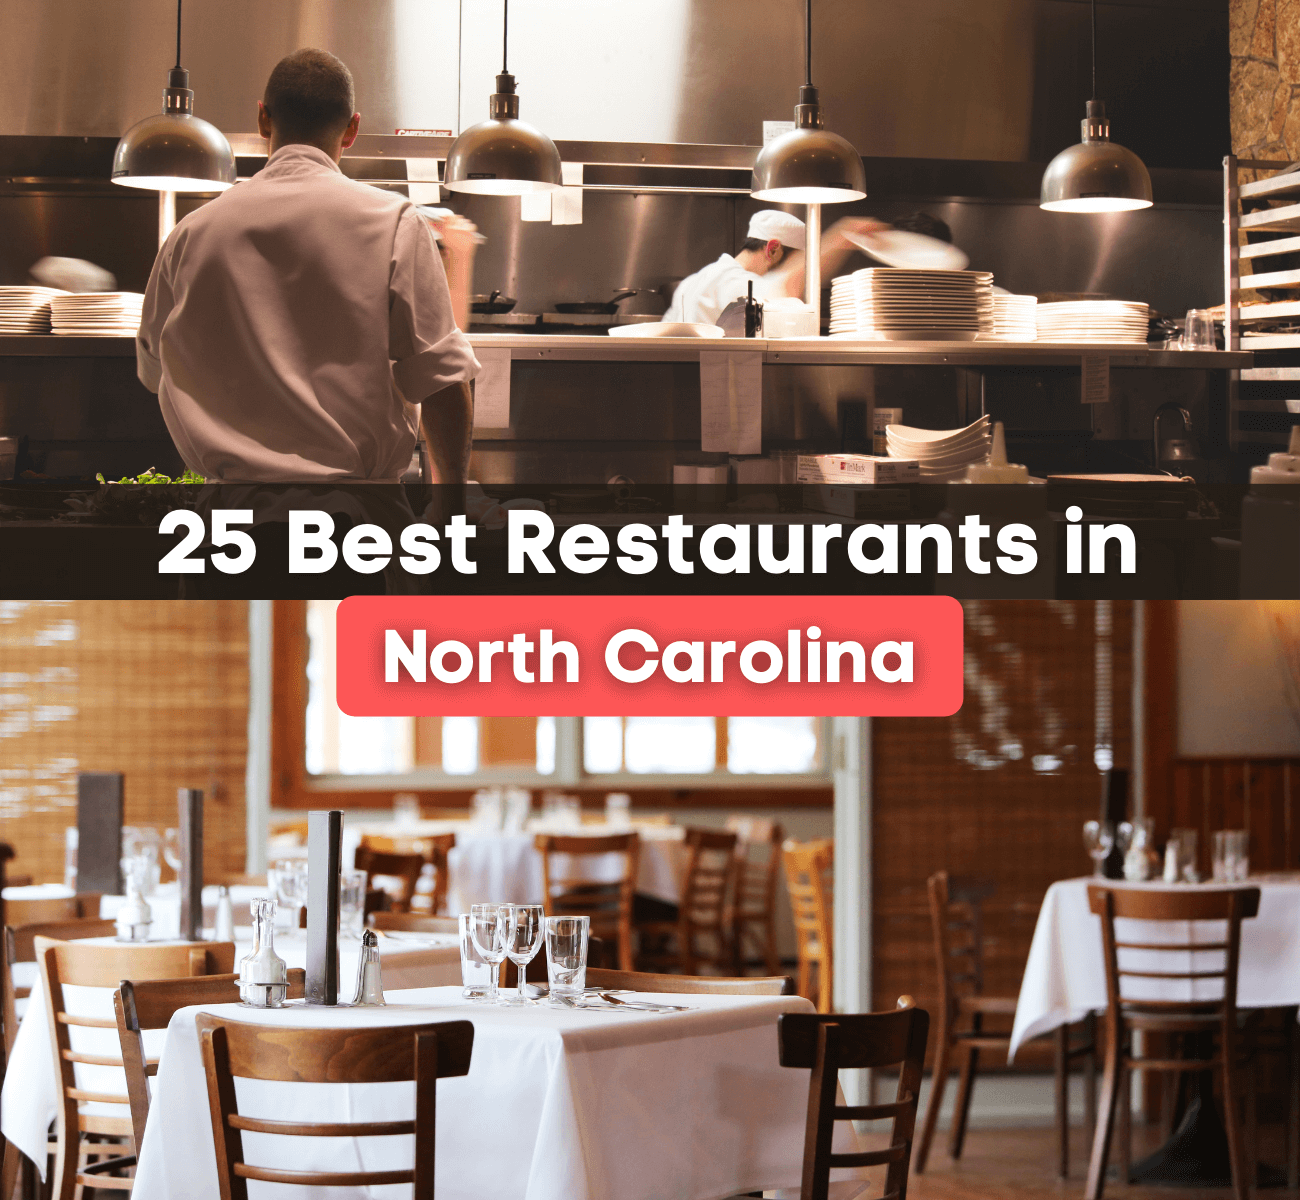 25 Best Restaurants in North Carolina - What are the top restaurants in the state of NC?